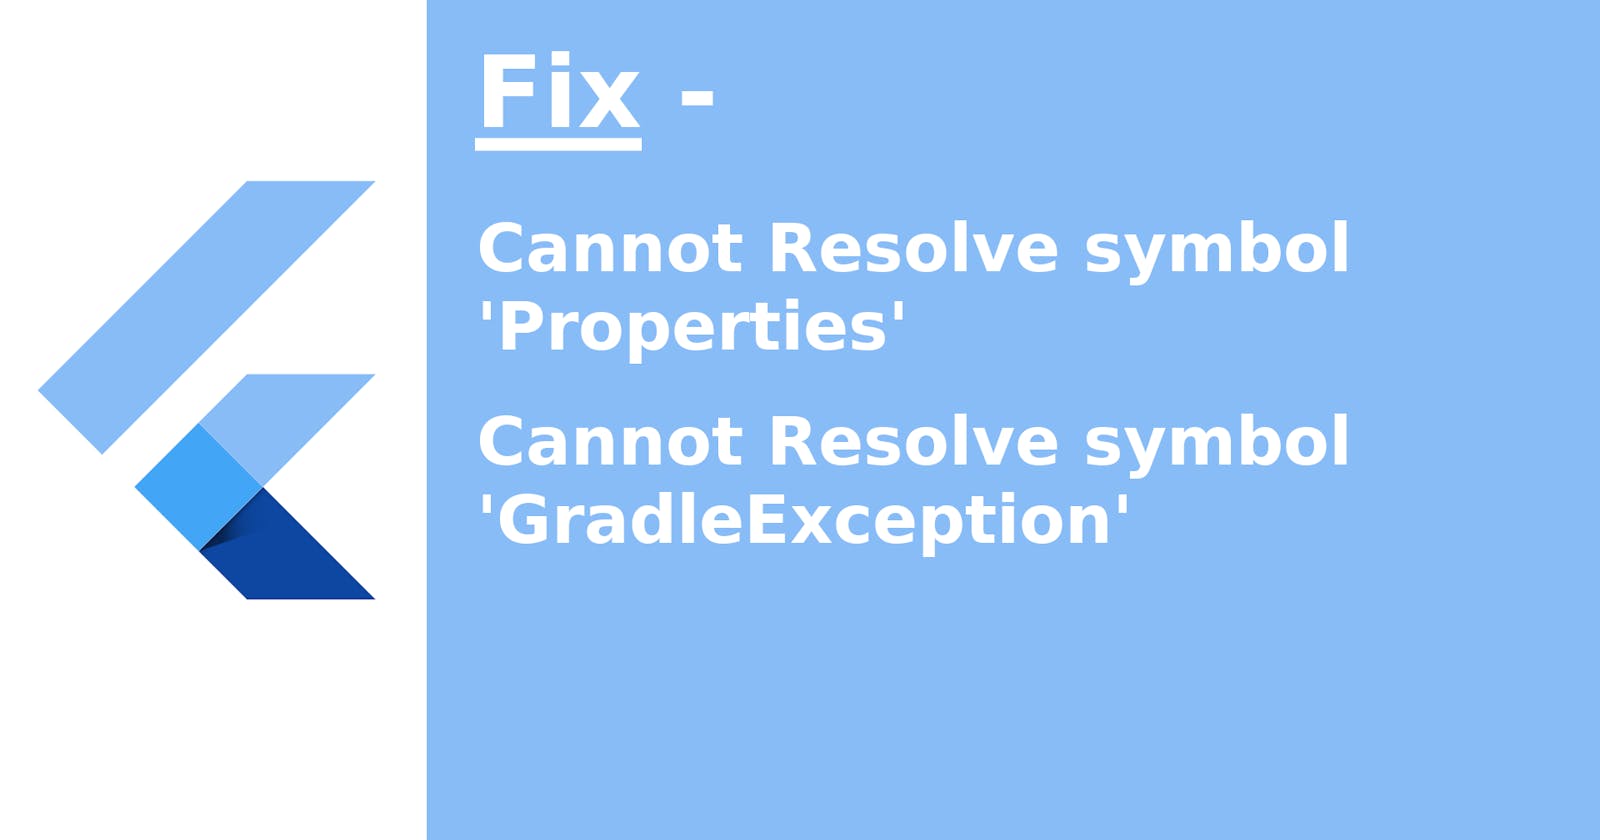 Fix Cannot revolve symbol 'Properties' and 'GradleException' in Flutter within few steps.